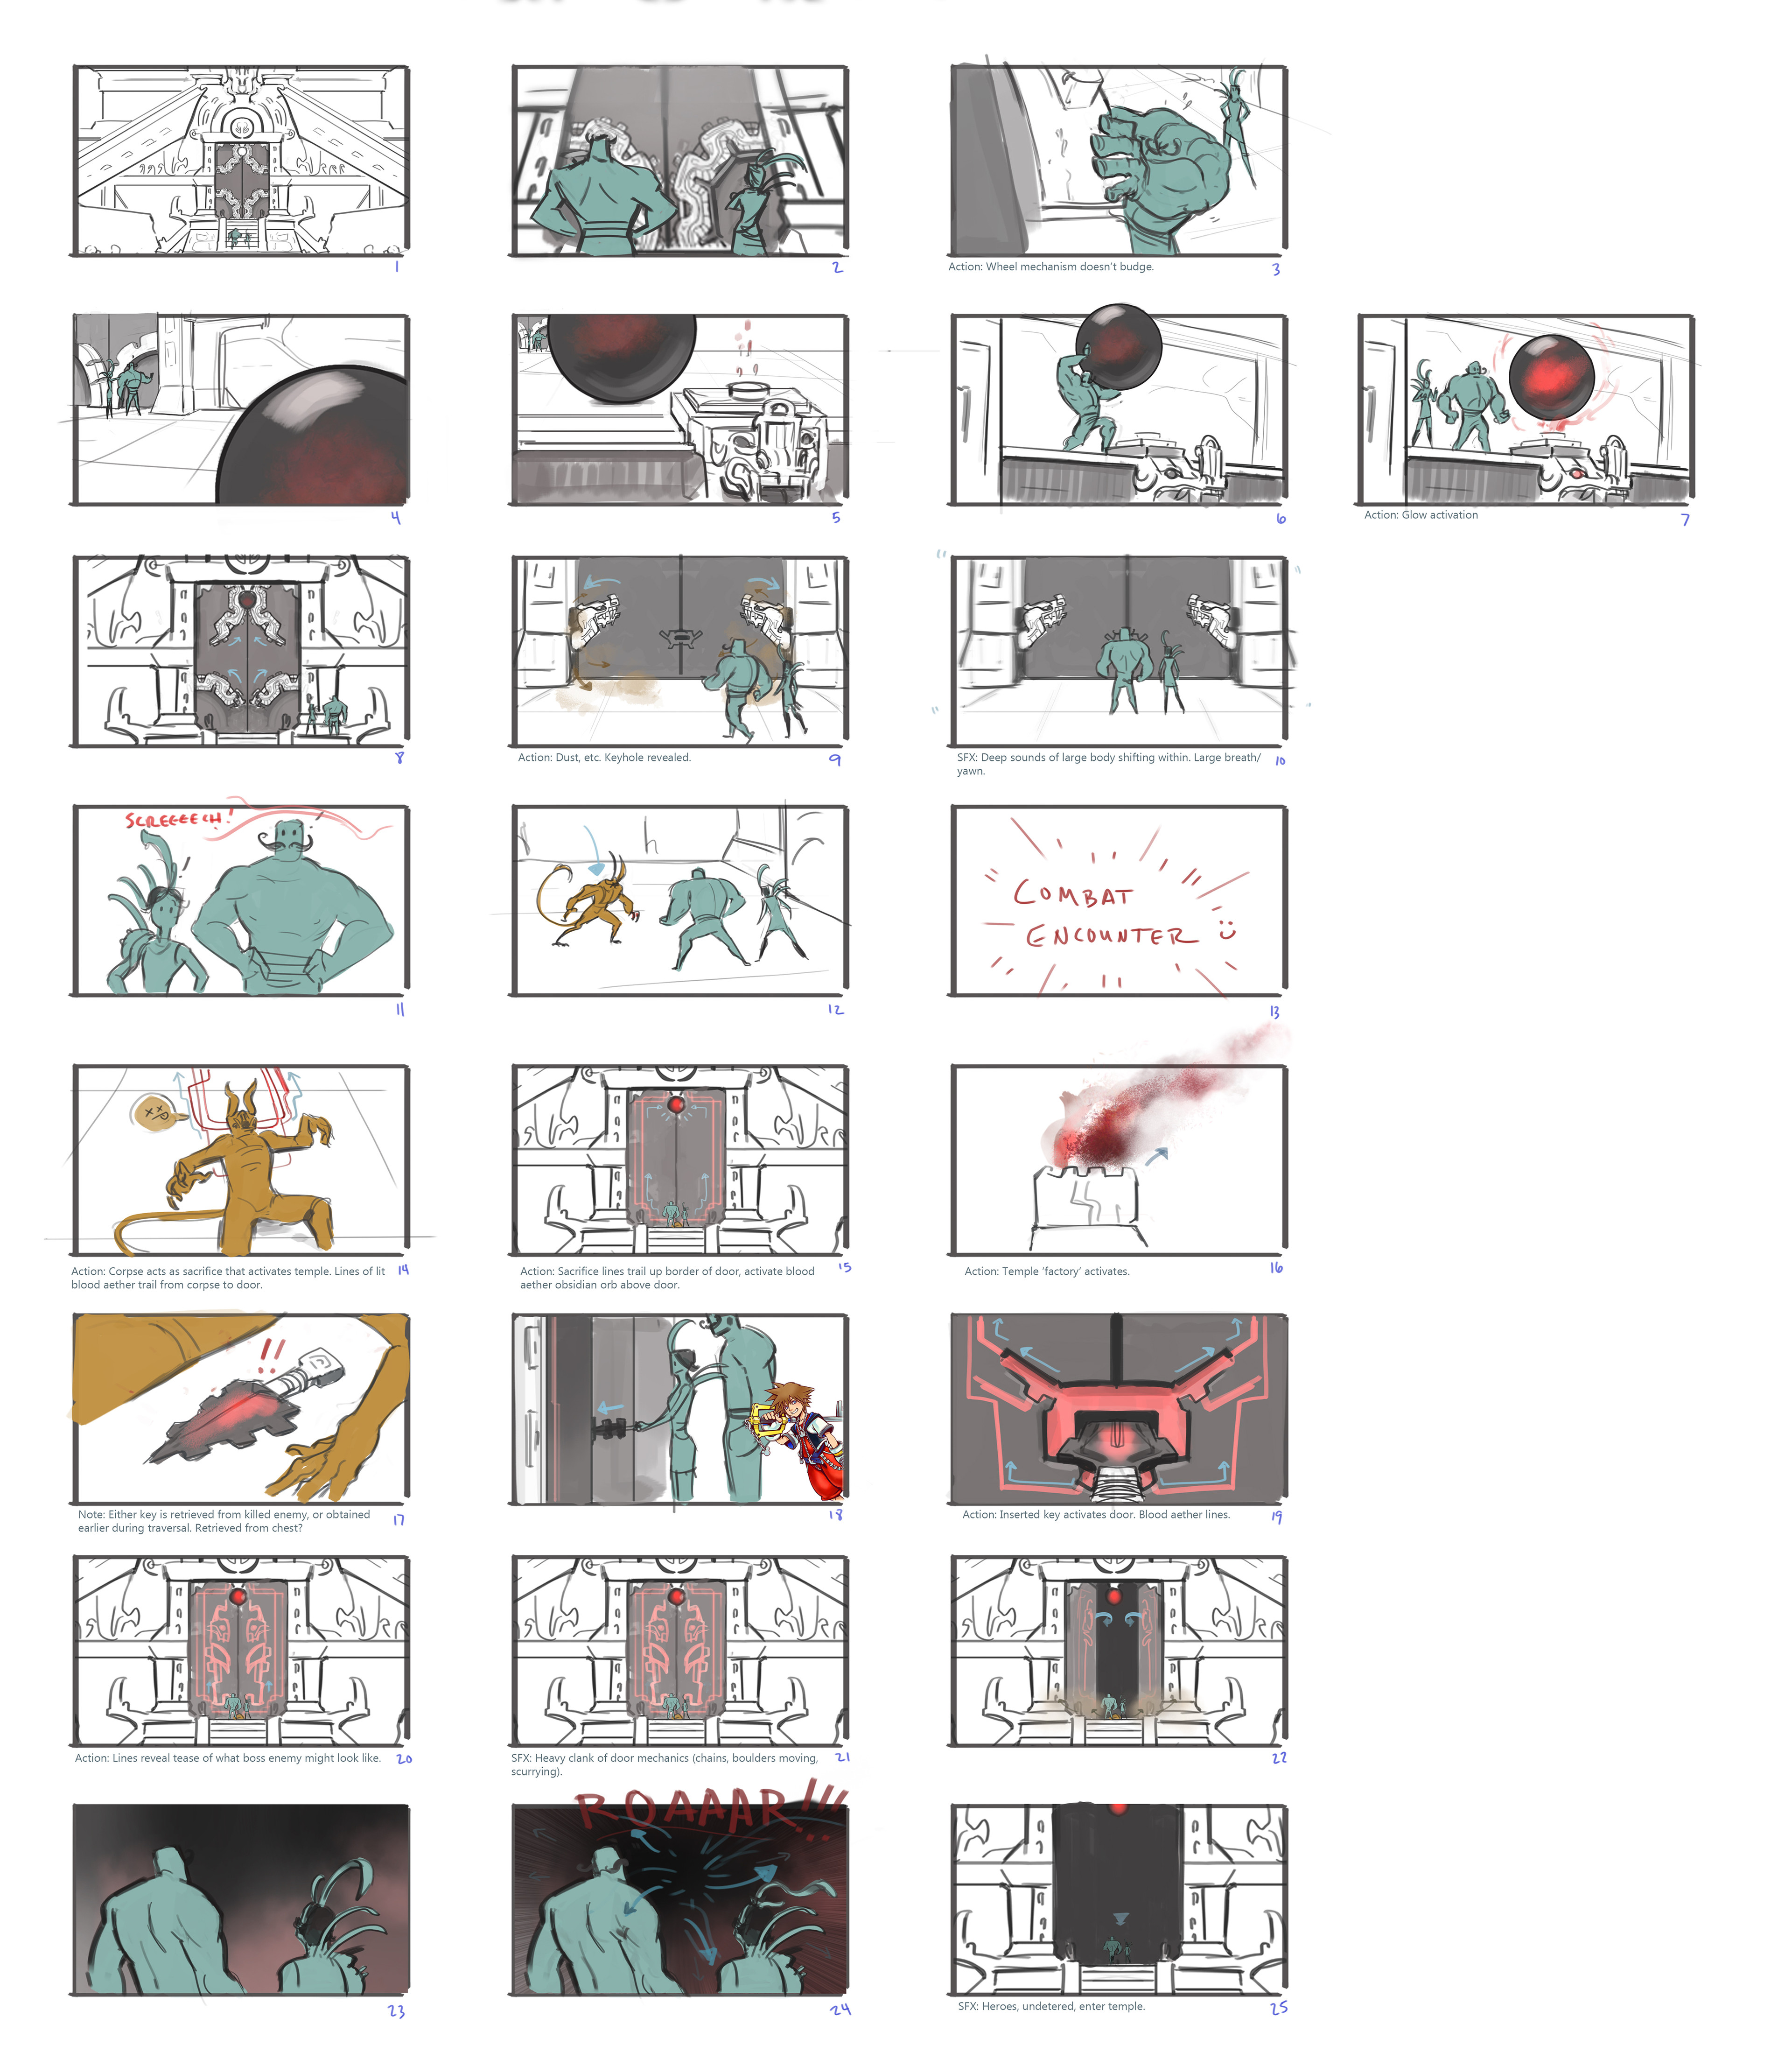 A quick 'n' dirty storyboard for opening a temple door. I overdid it a little with the process and eventually the entire scene was reduced to a quip between characters and simple key insertion.